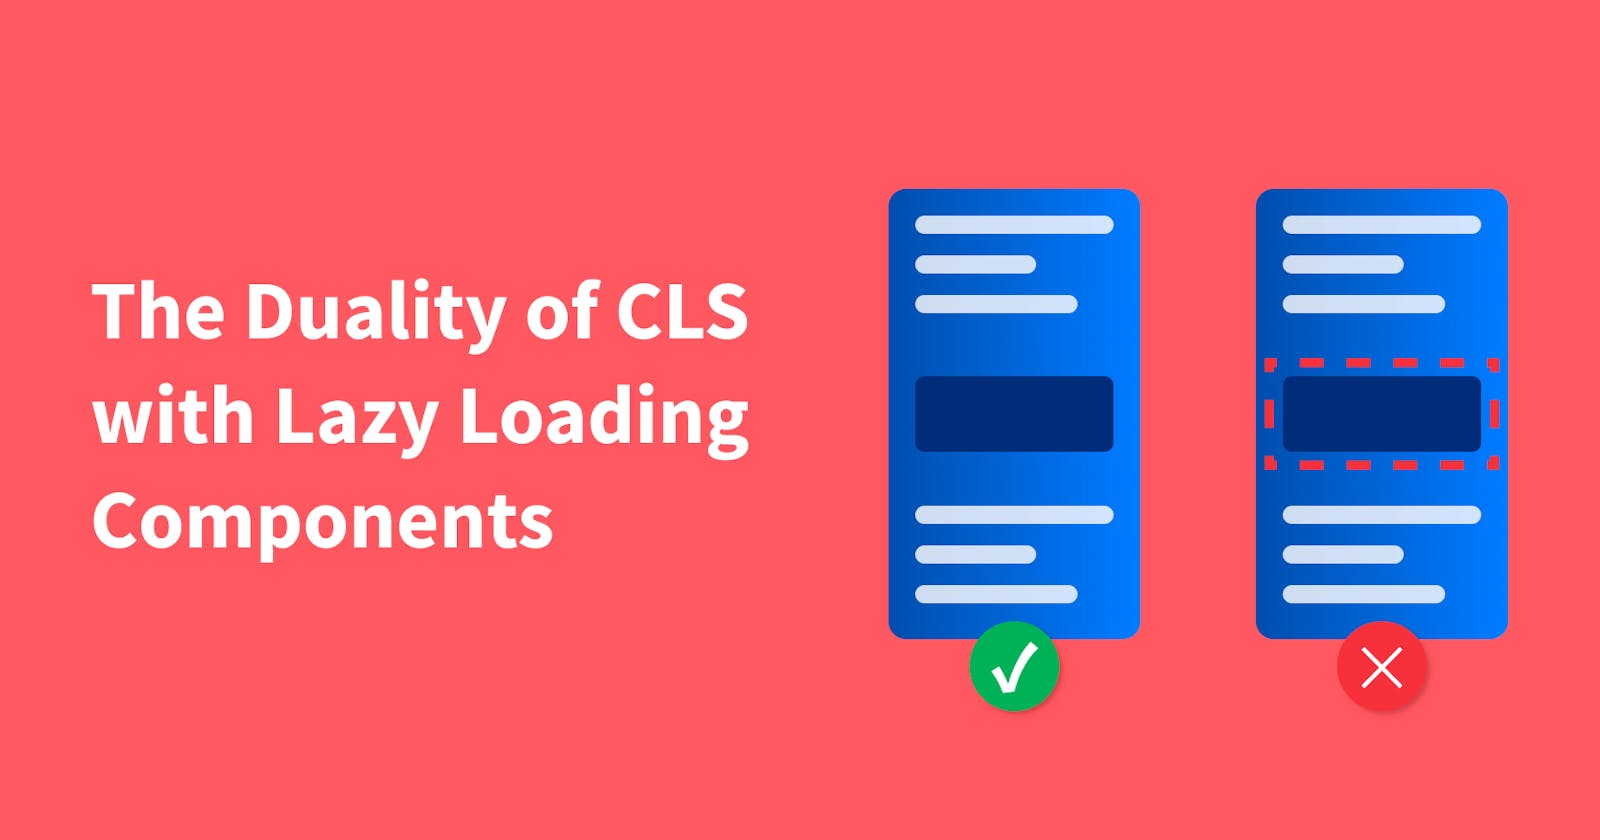 The Duality of CLS with Lazy Loading Components